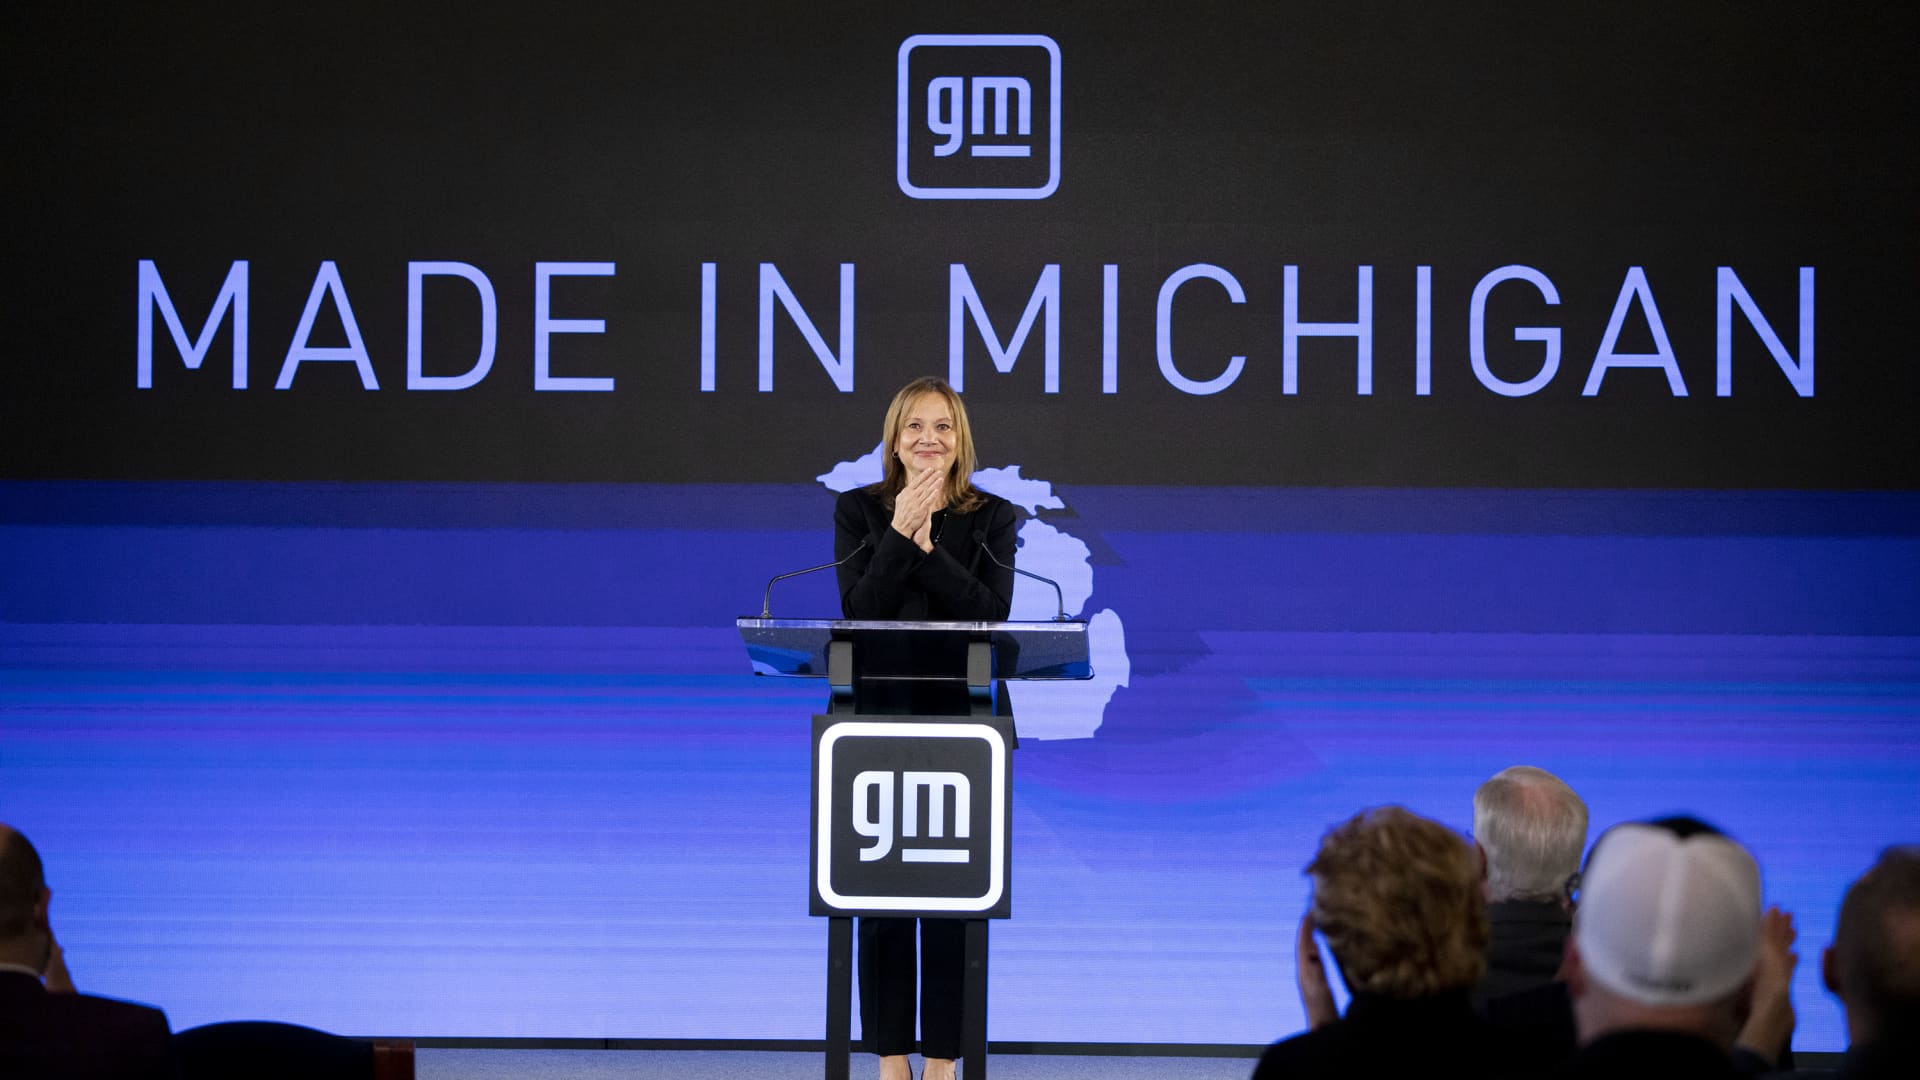 General Motors CEO Mary Barra announces a $7 billion investment, the largest in the company's history, in electric vehicle and battery production in Michigan on January 25, 2022 in Lansing, Michigan.